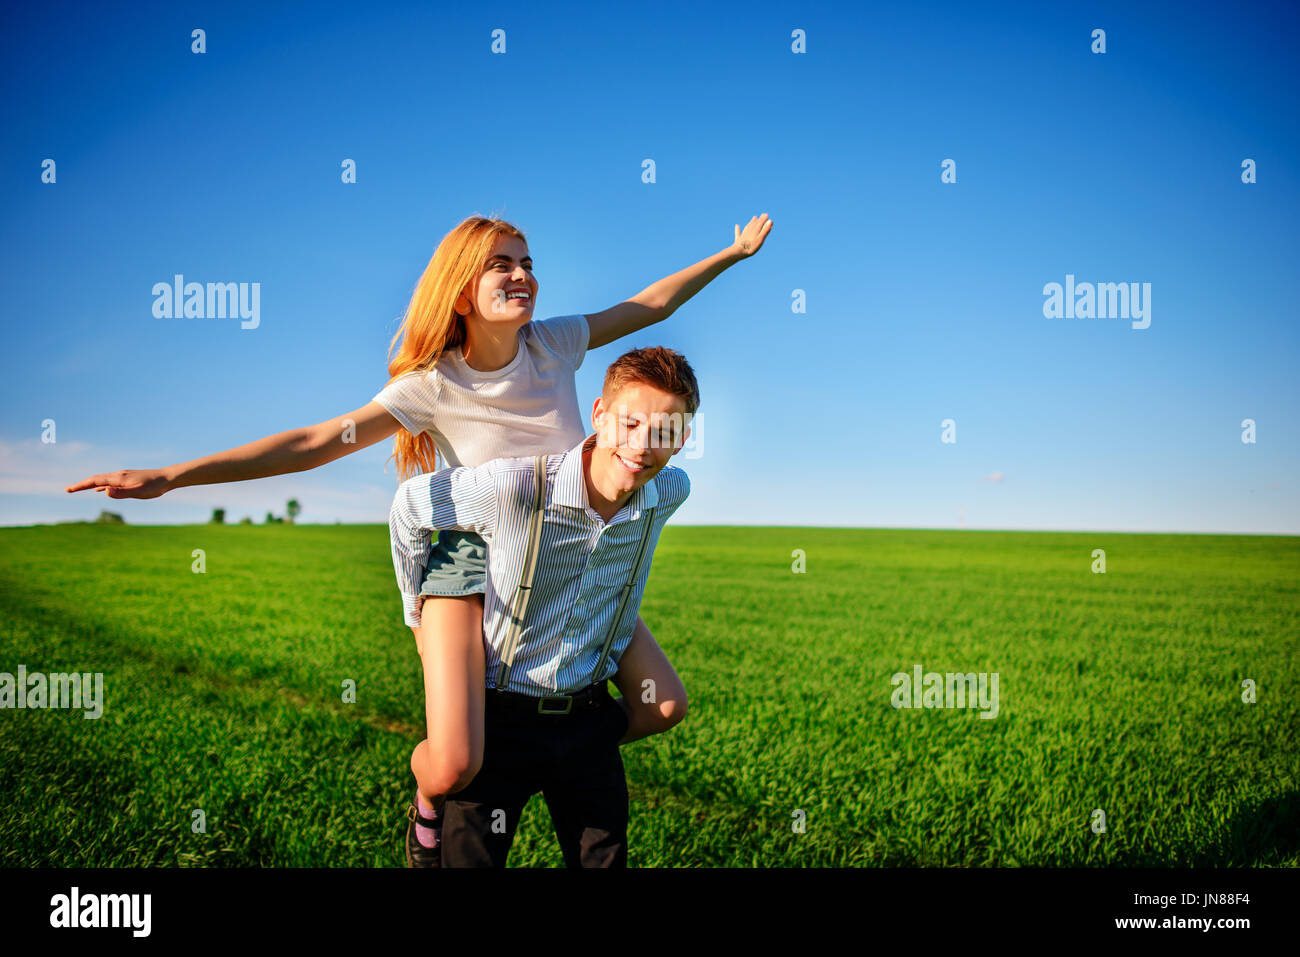 Smiling Man is holding on his back happy woman, who pulls out her arms and simulates a flight against the background of the blue sky and the green fie Stock Photo